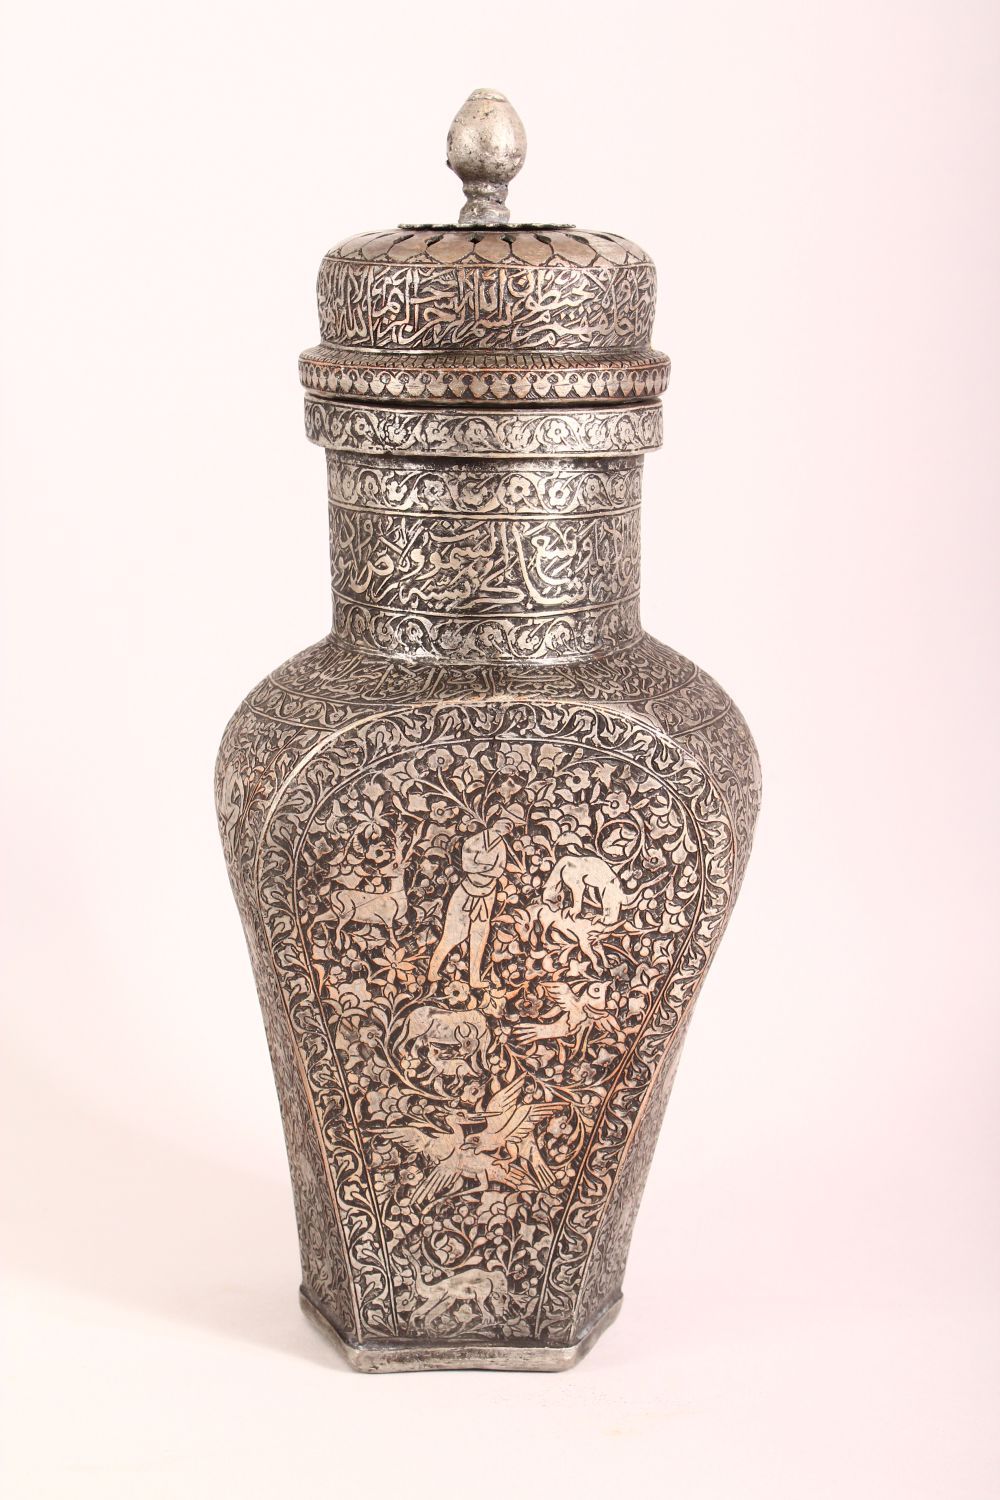 A GOOD PERSIAN TINNED COPPER LIDDED URN - the body carved with figures, animals and flora, with a - Image 2 of 8